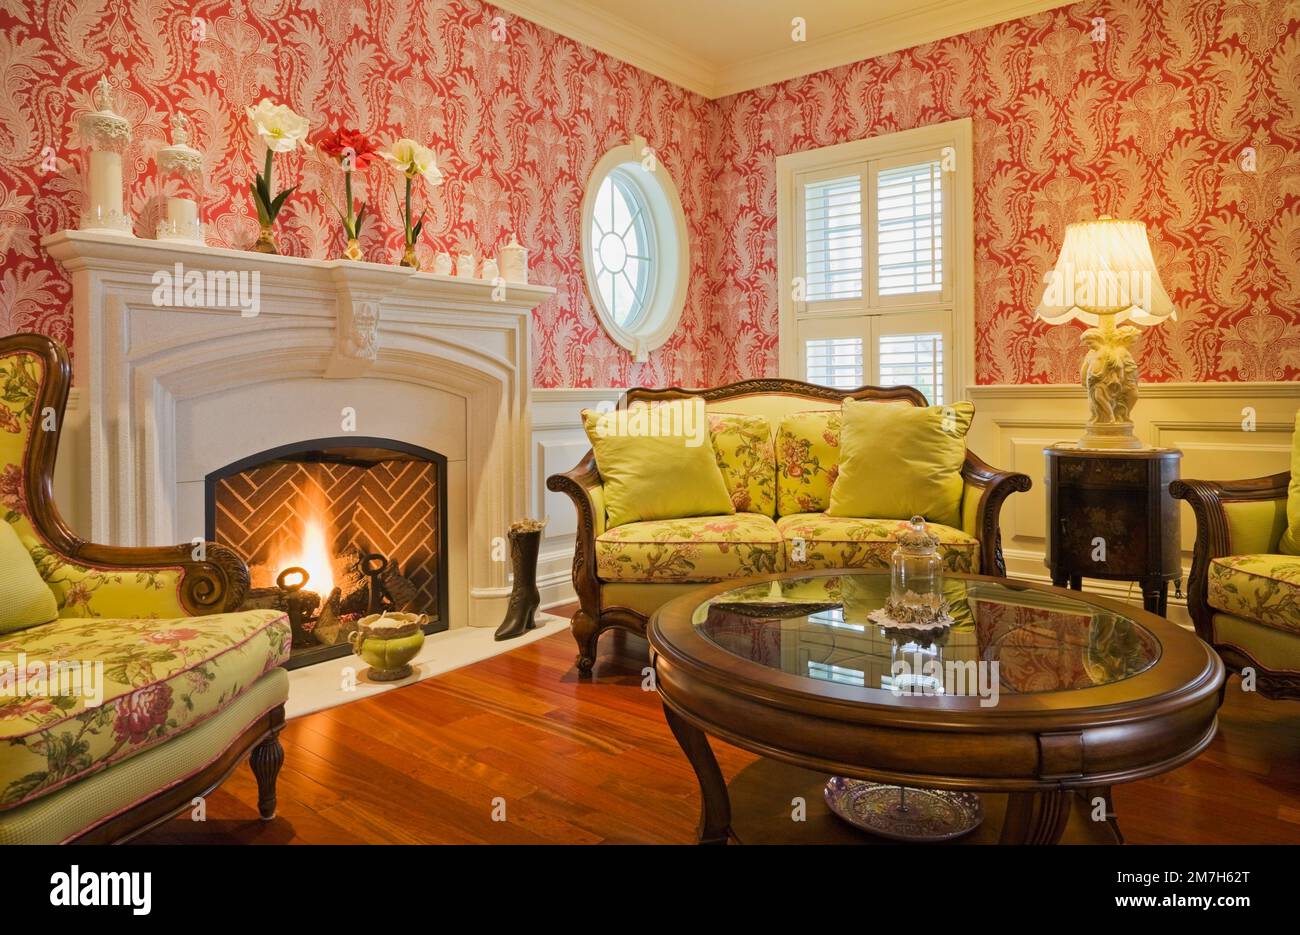 Lit propane gas fireplace and yellow flowery upholstered armchairs and sofa in parlour room inside elegant cottage style home. Stock Photo